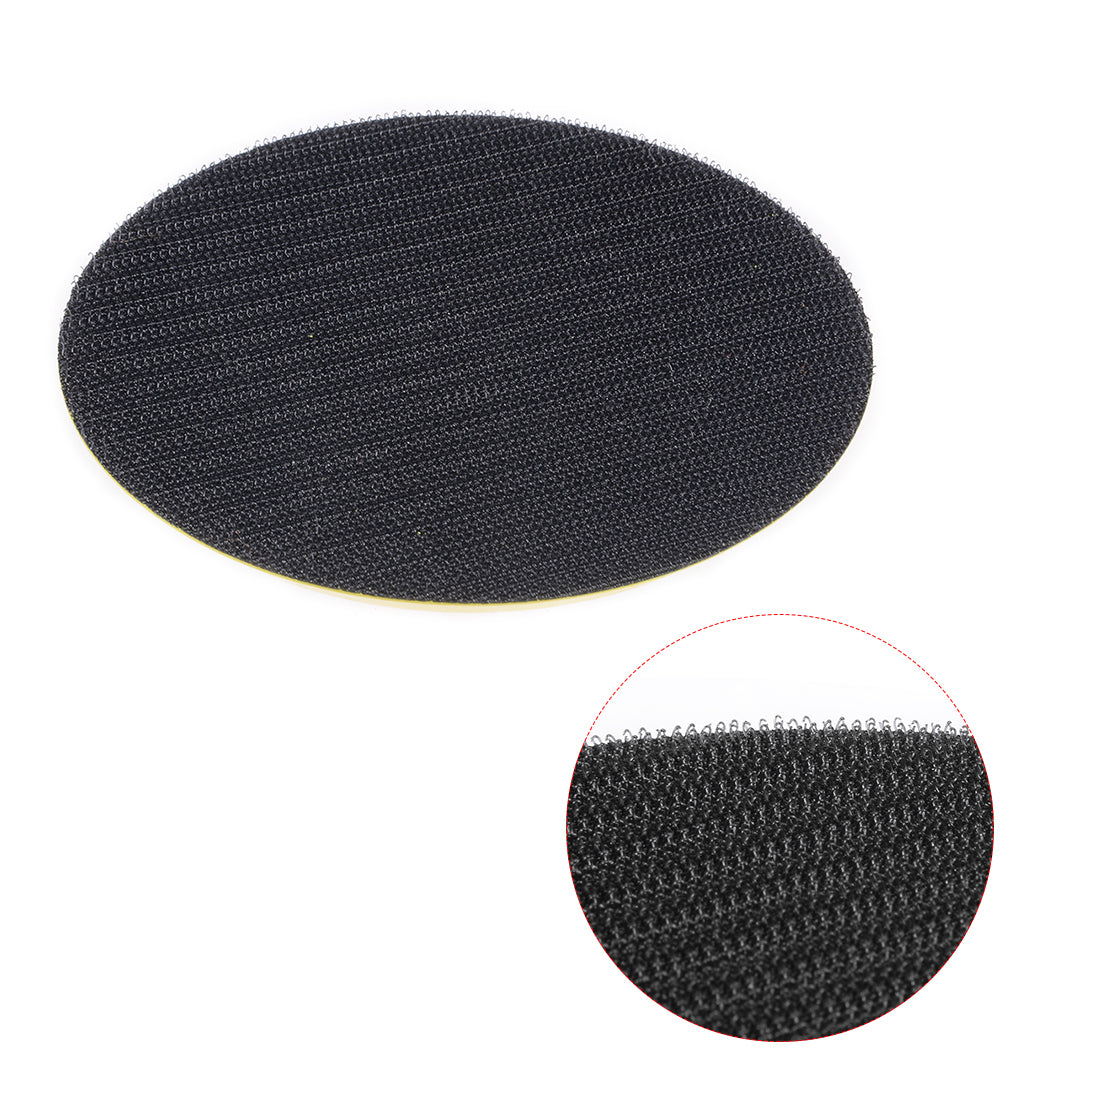 uxcell Uxcell 5 Inch Hook and Loop Backing Sanding Pads with 5/16 Inch * 24 Thread for Diamond Polishing Pads